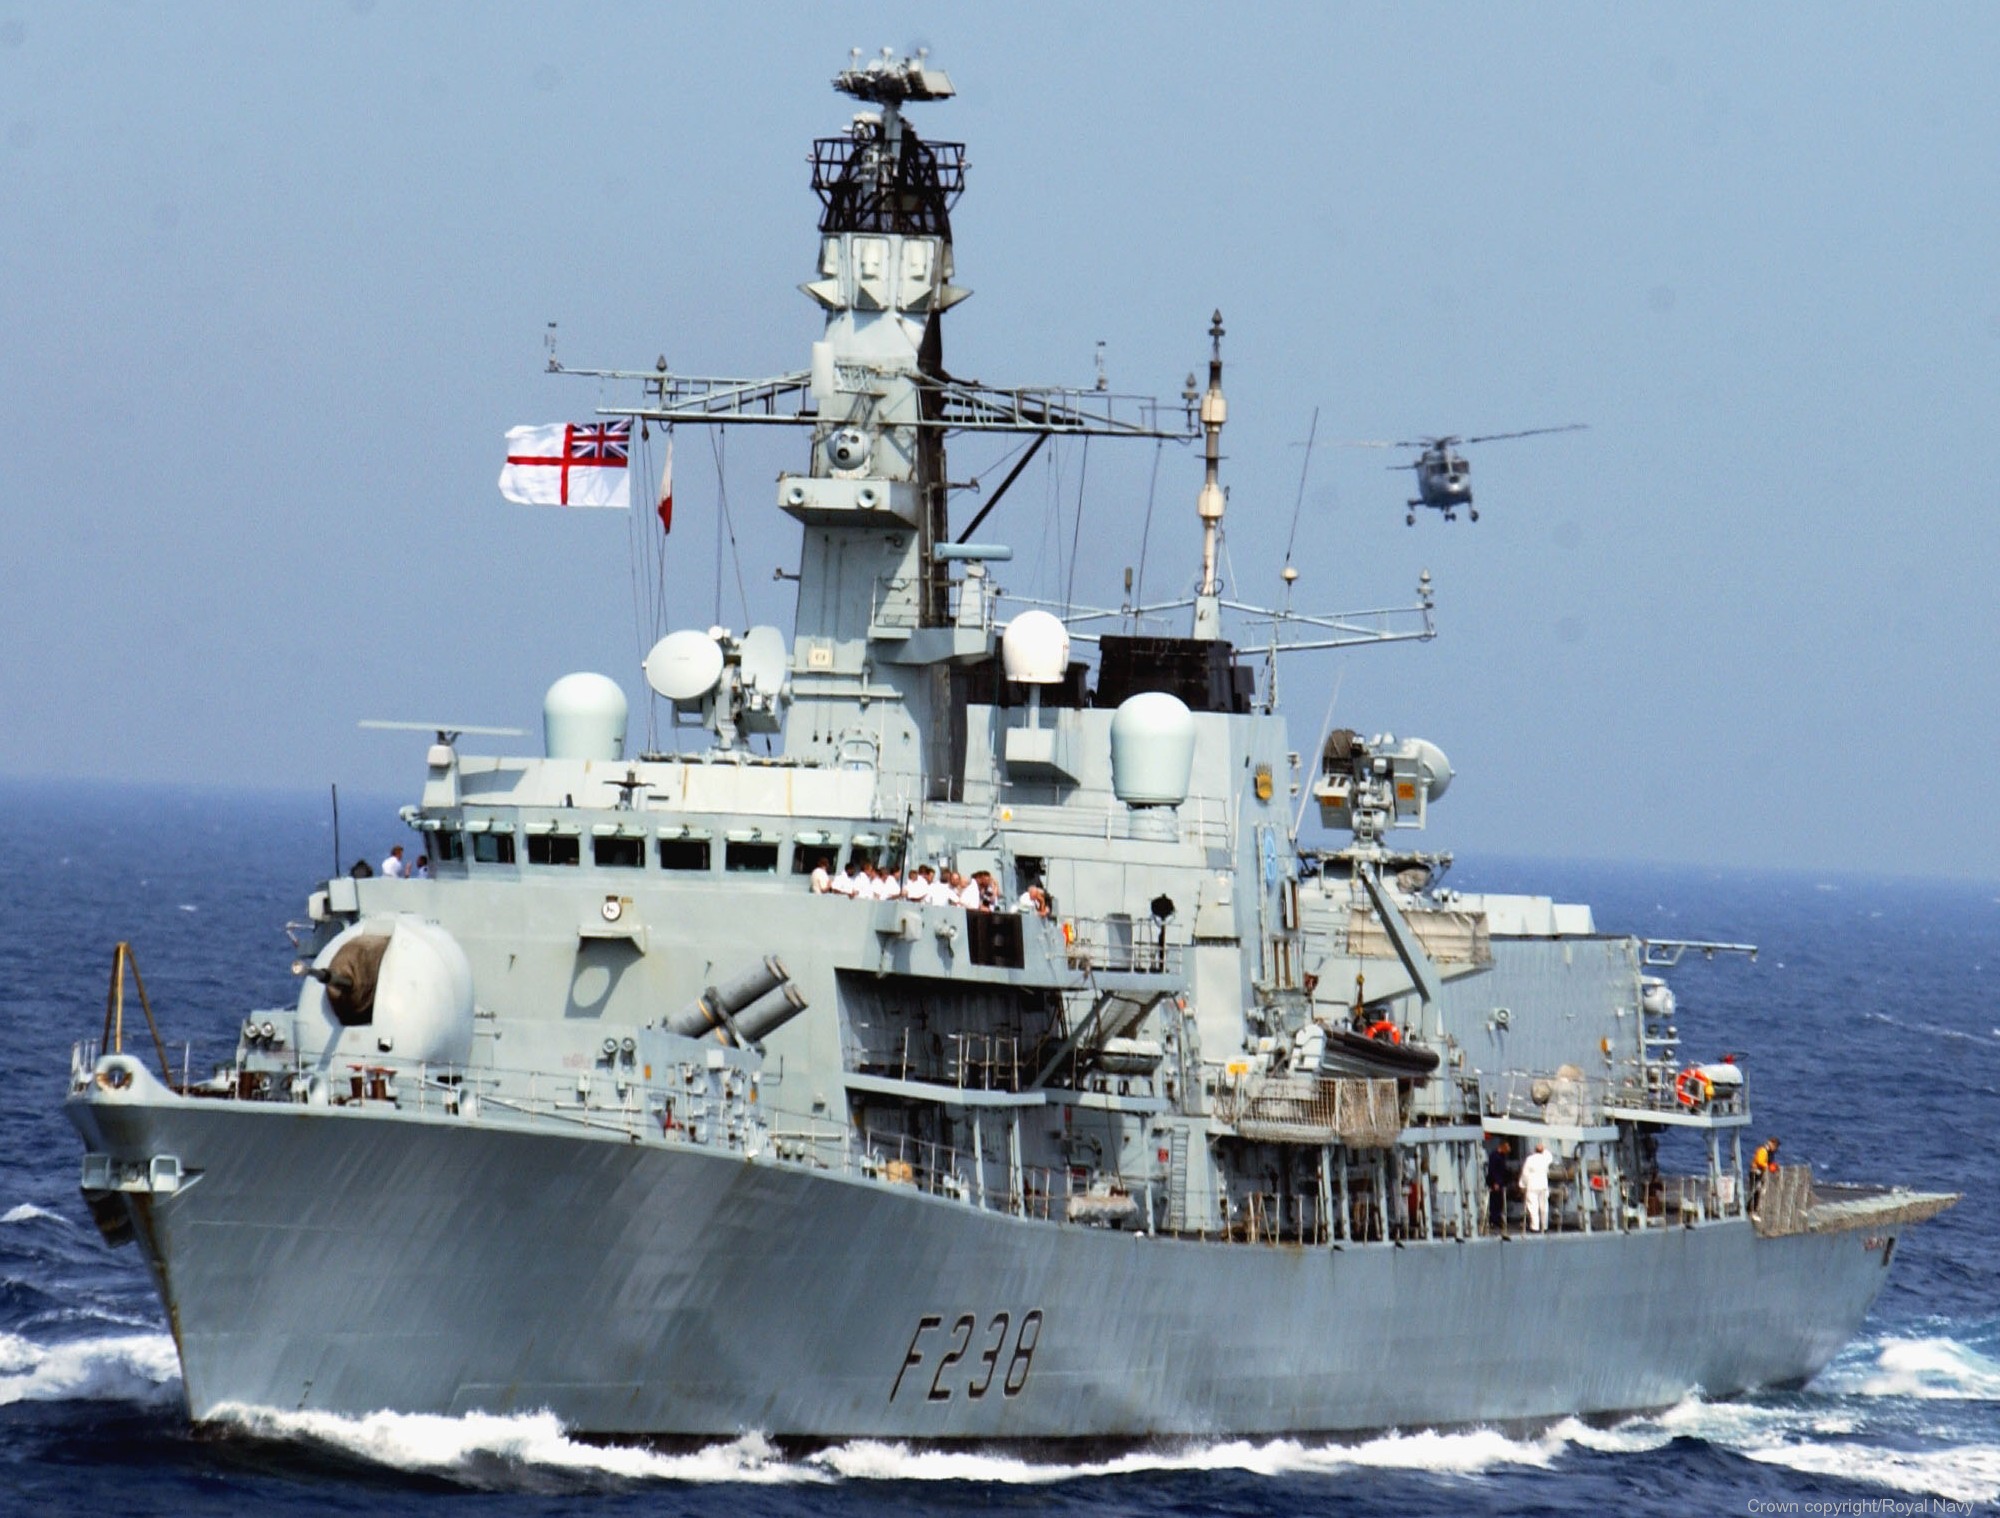 f-238 hms northumberland type 23 duke class guided missile frigate royal navy 18